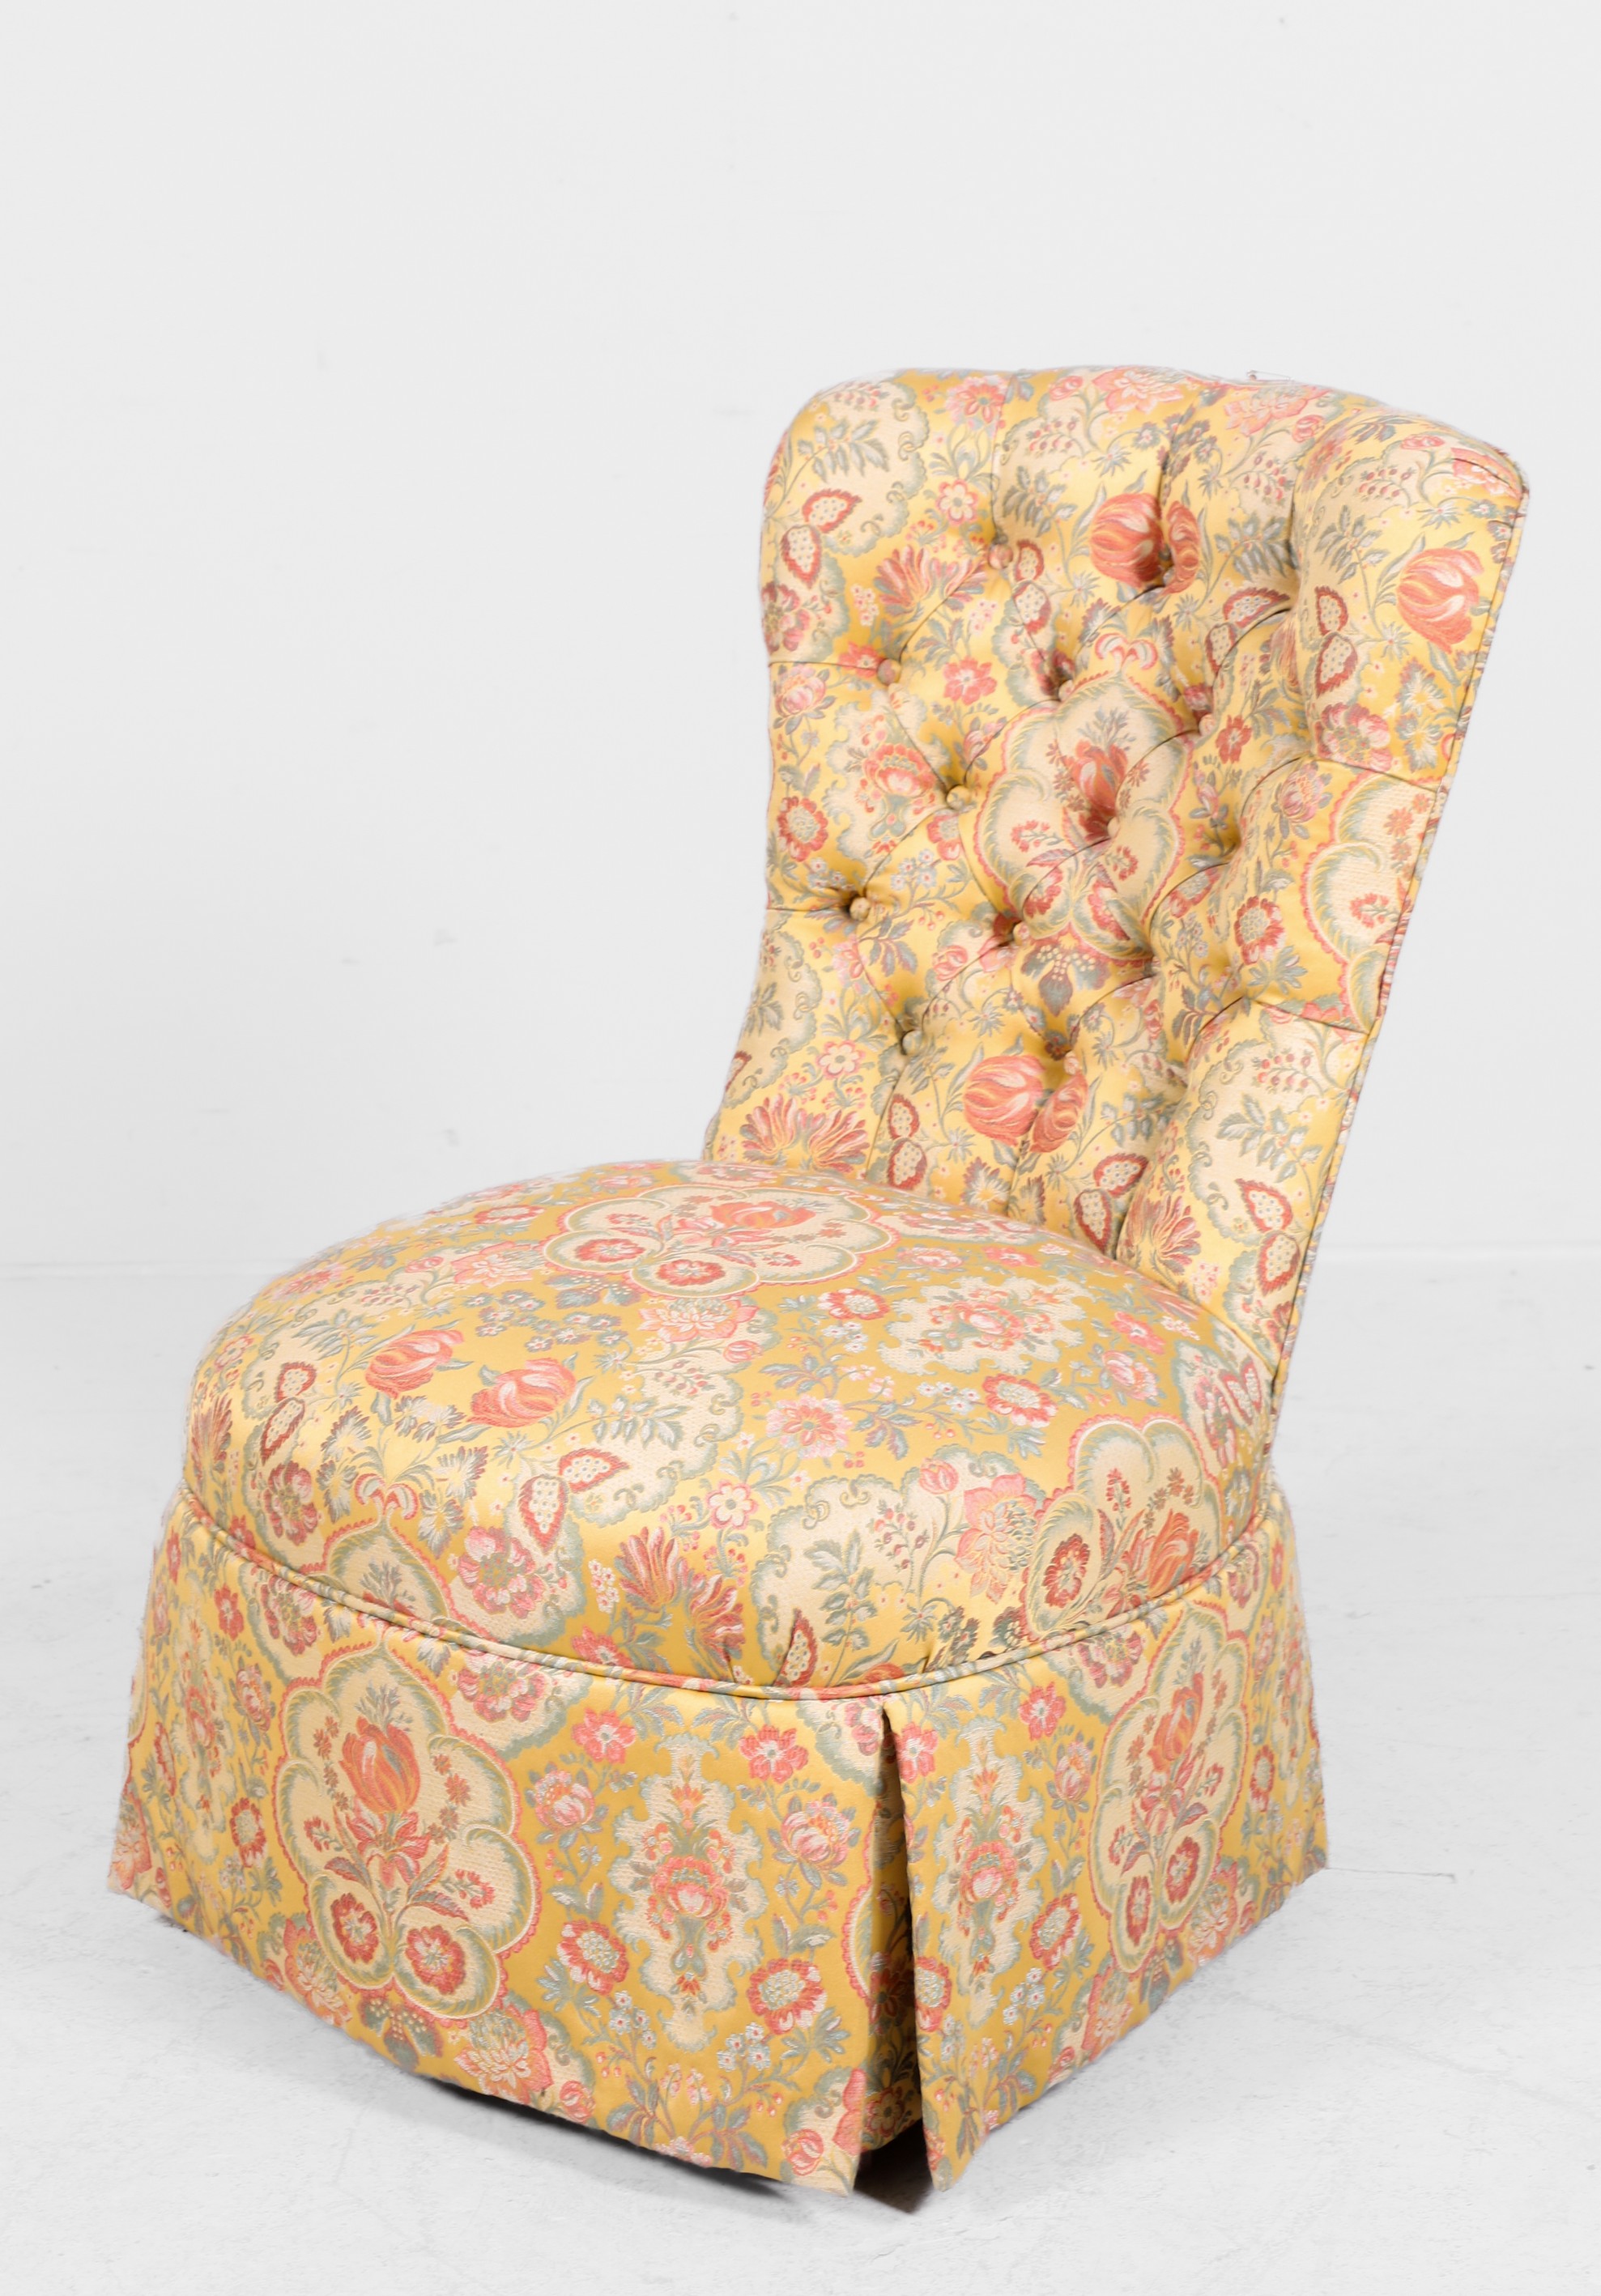 Upholstered vanity chair, tufted